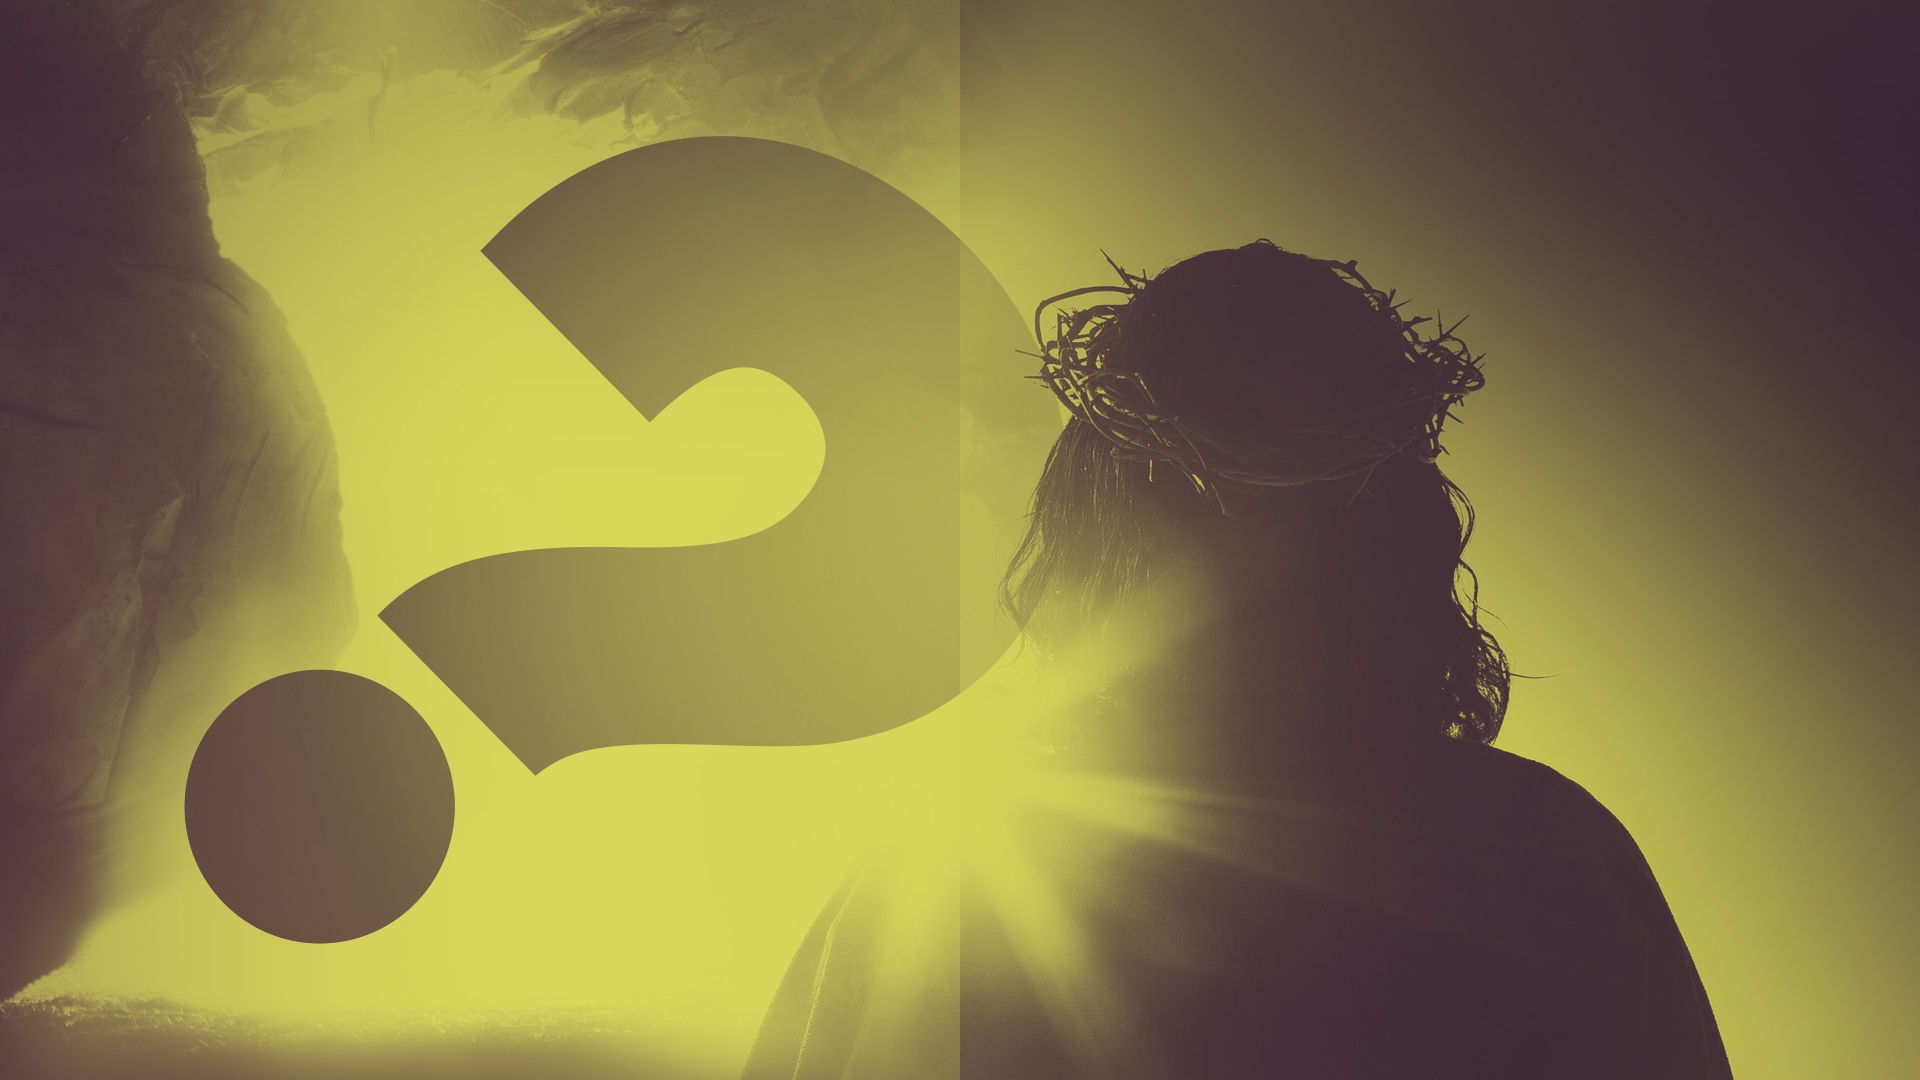 Want to know more about Christianity, or simply want to explore some of life's big questions?